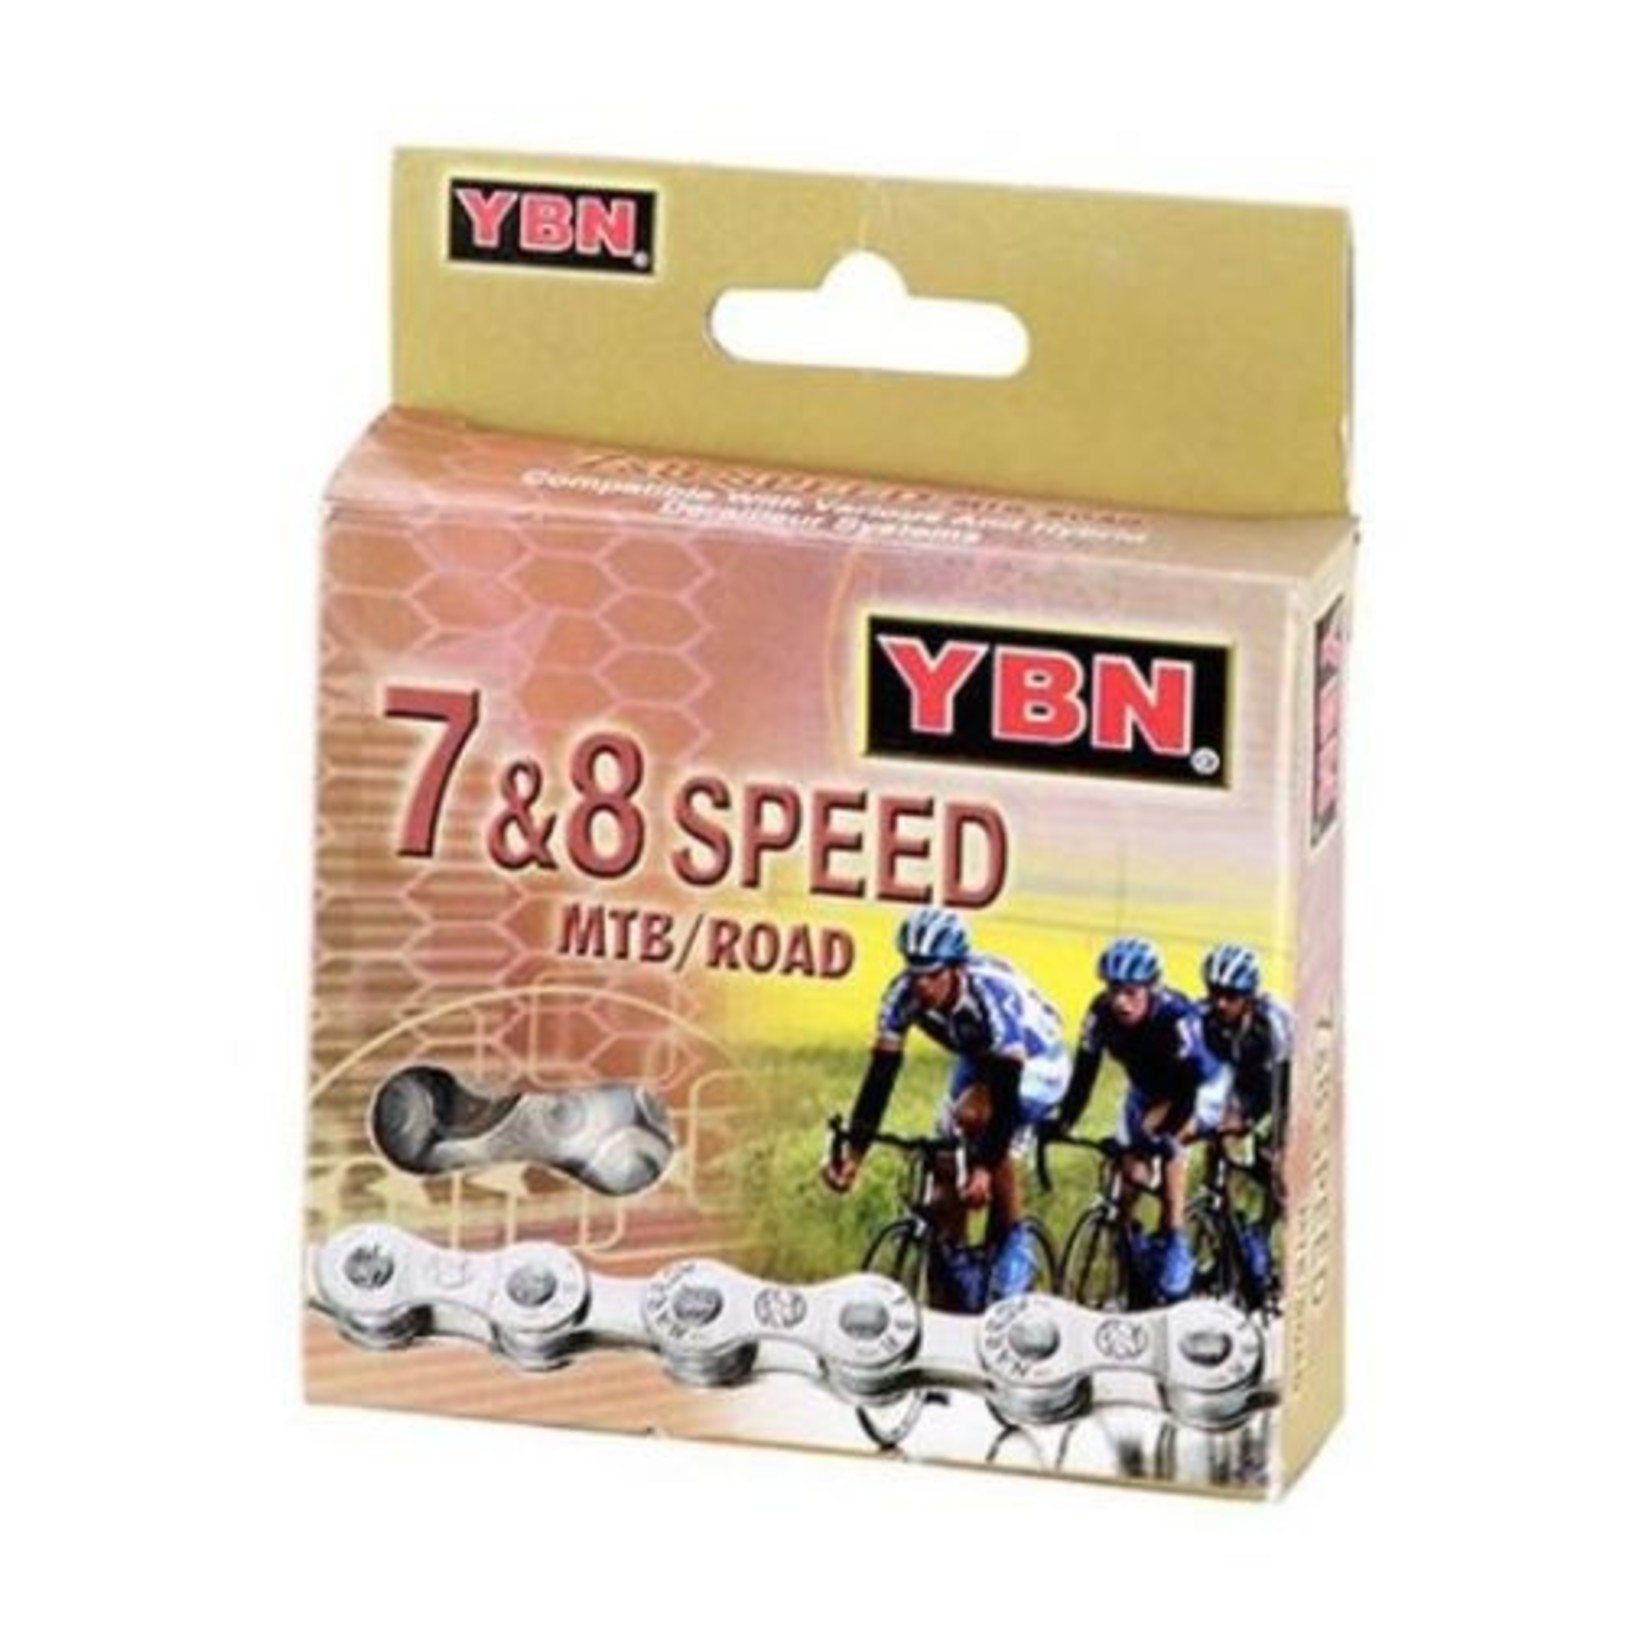 Yaban Yaban Bicycle Chain - 7 & 8 Speed - Ruster Buster - 1/2 X 3/32 X 116L Solid Pin